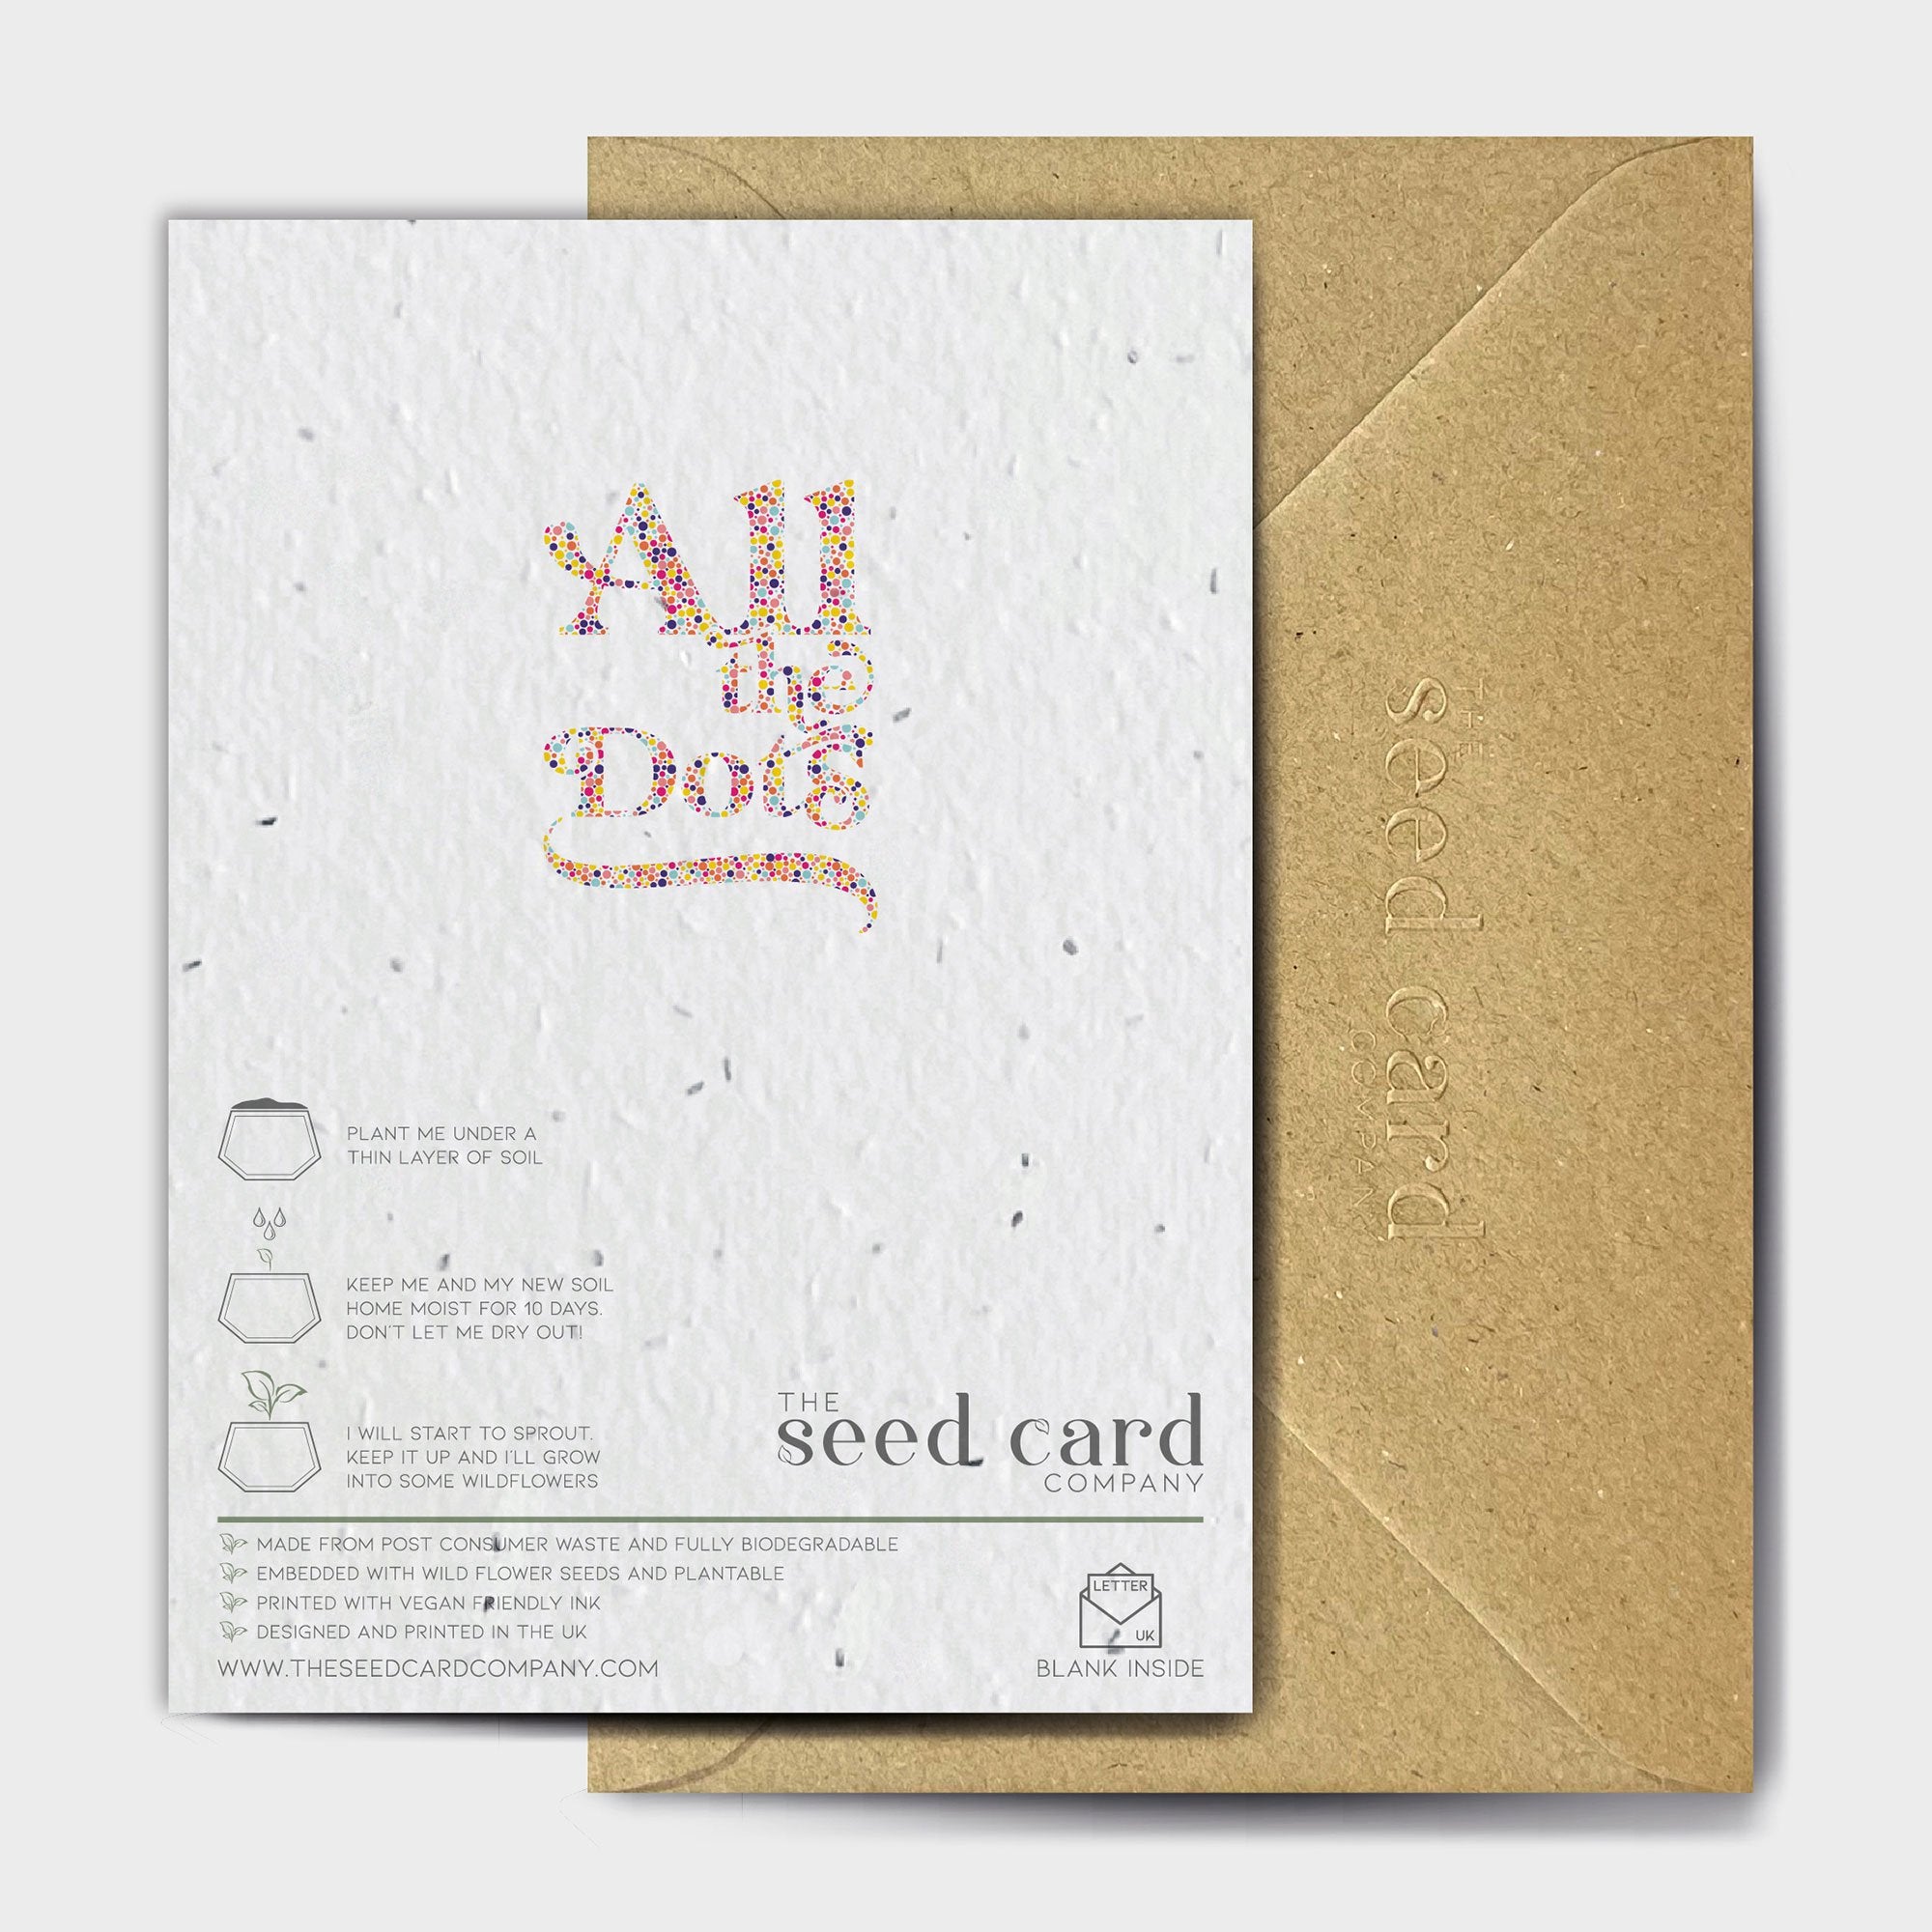 Shop online Happy Dotday - 100% biodegradable seed-embedded cards Shop -The Seed Card Company